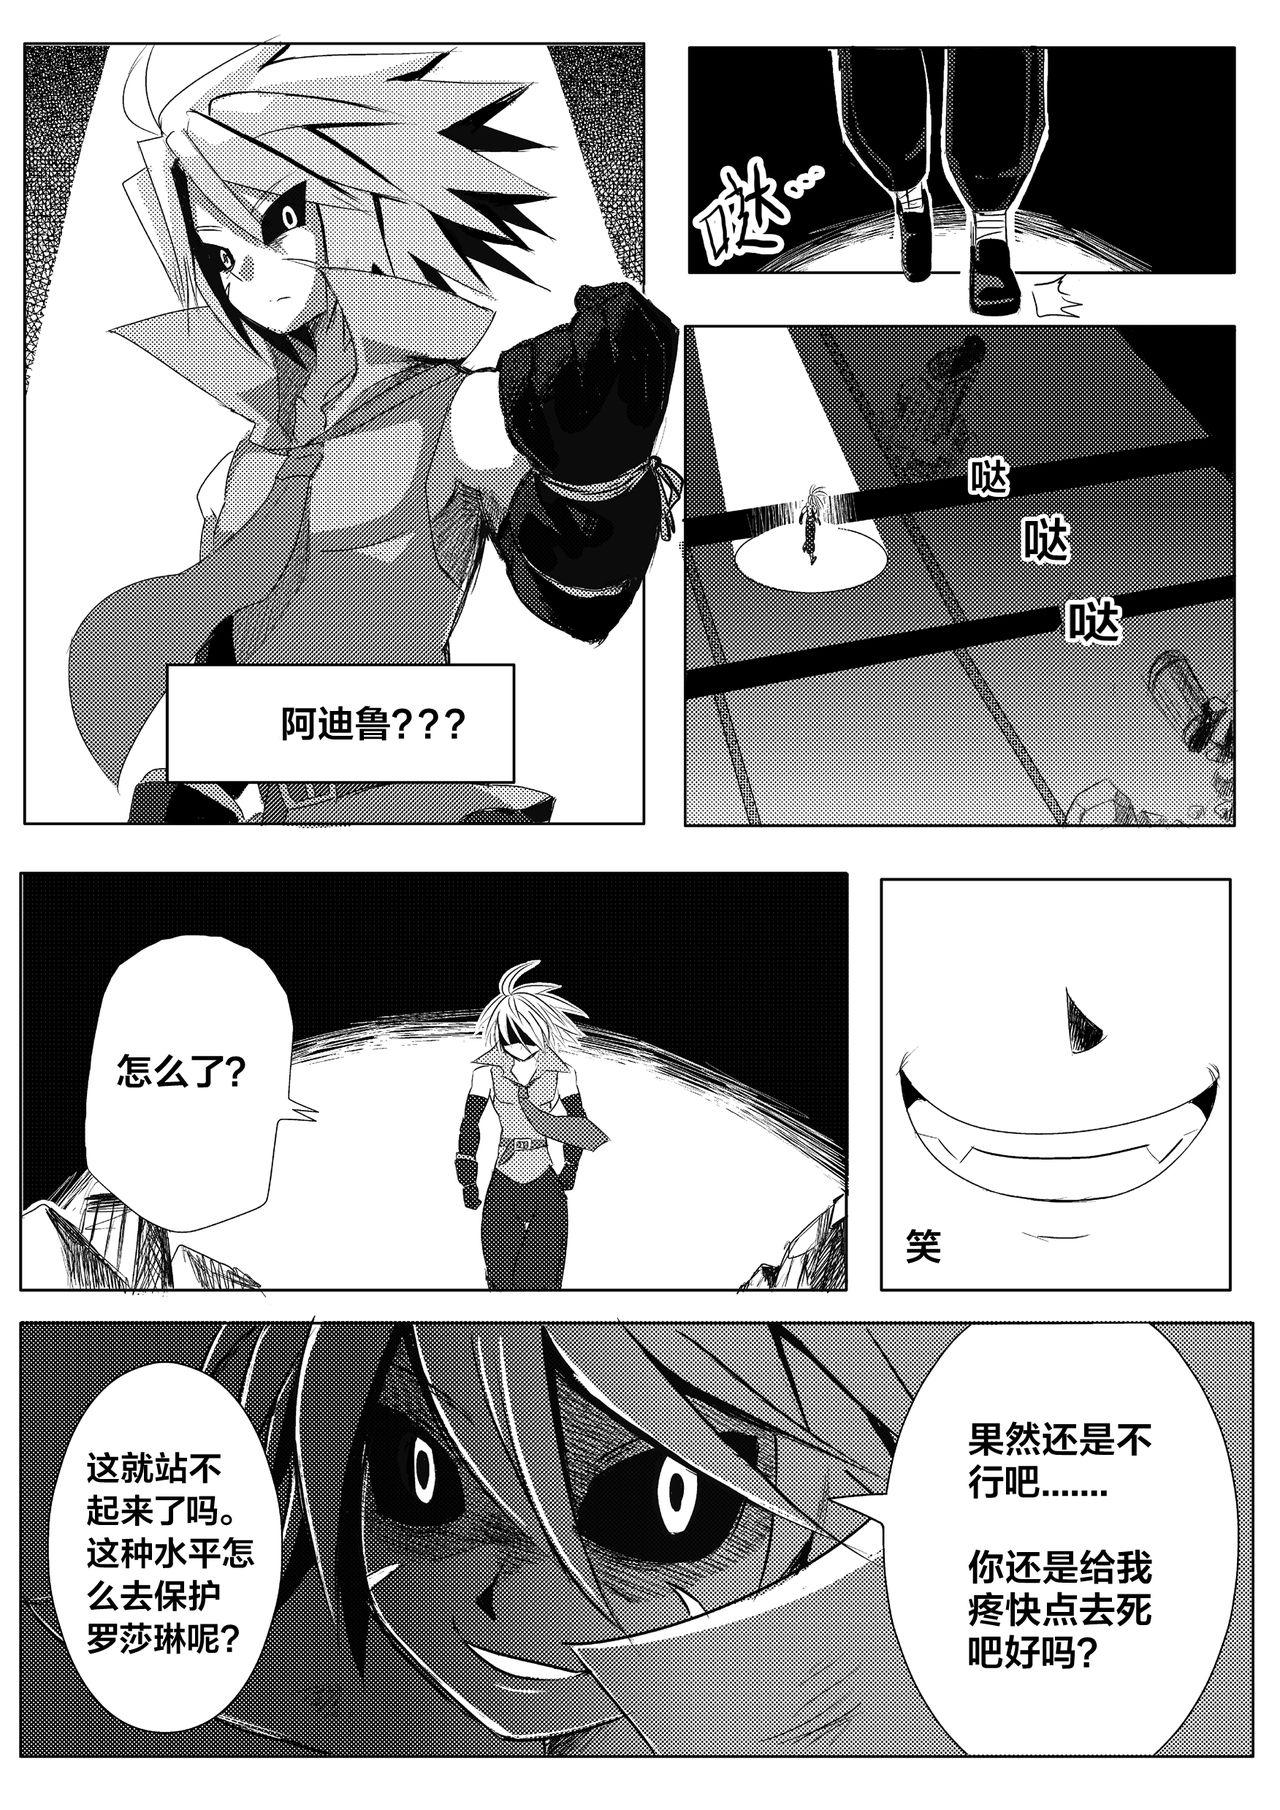 Wet Cunt 魔界戰記2 - Disgaea Cunt - Page 5